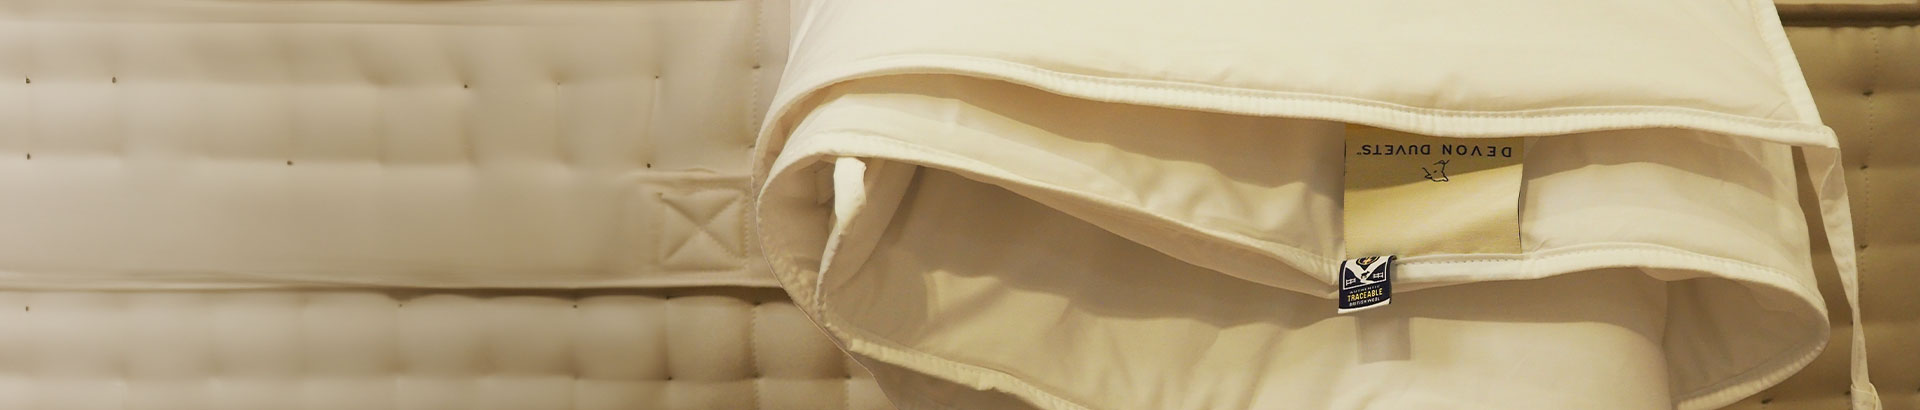 Devon Duvet with detailed close-up of natural wool fibers used in Devon Duvets’ hypoallergenic and eco-friendly products.